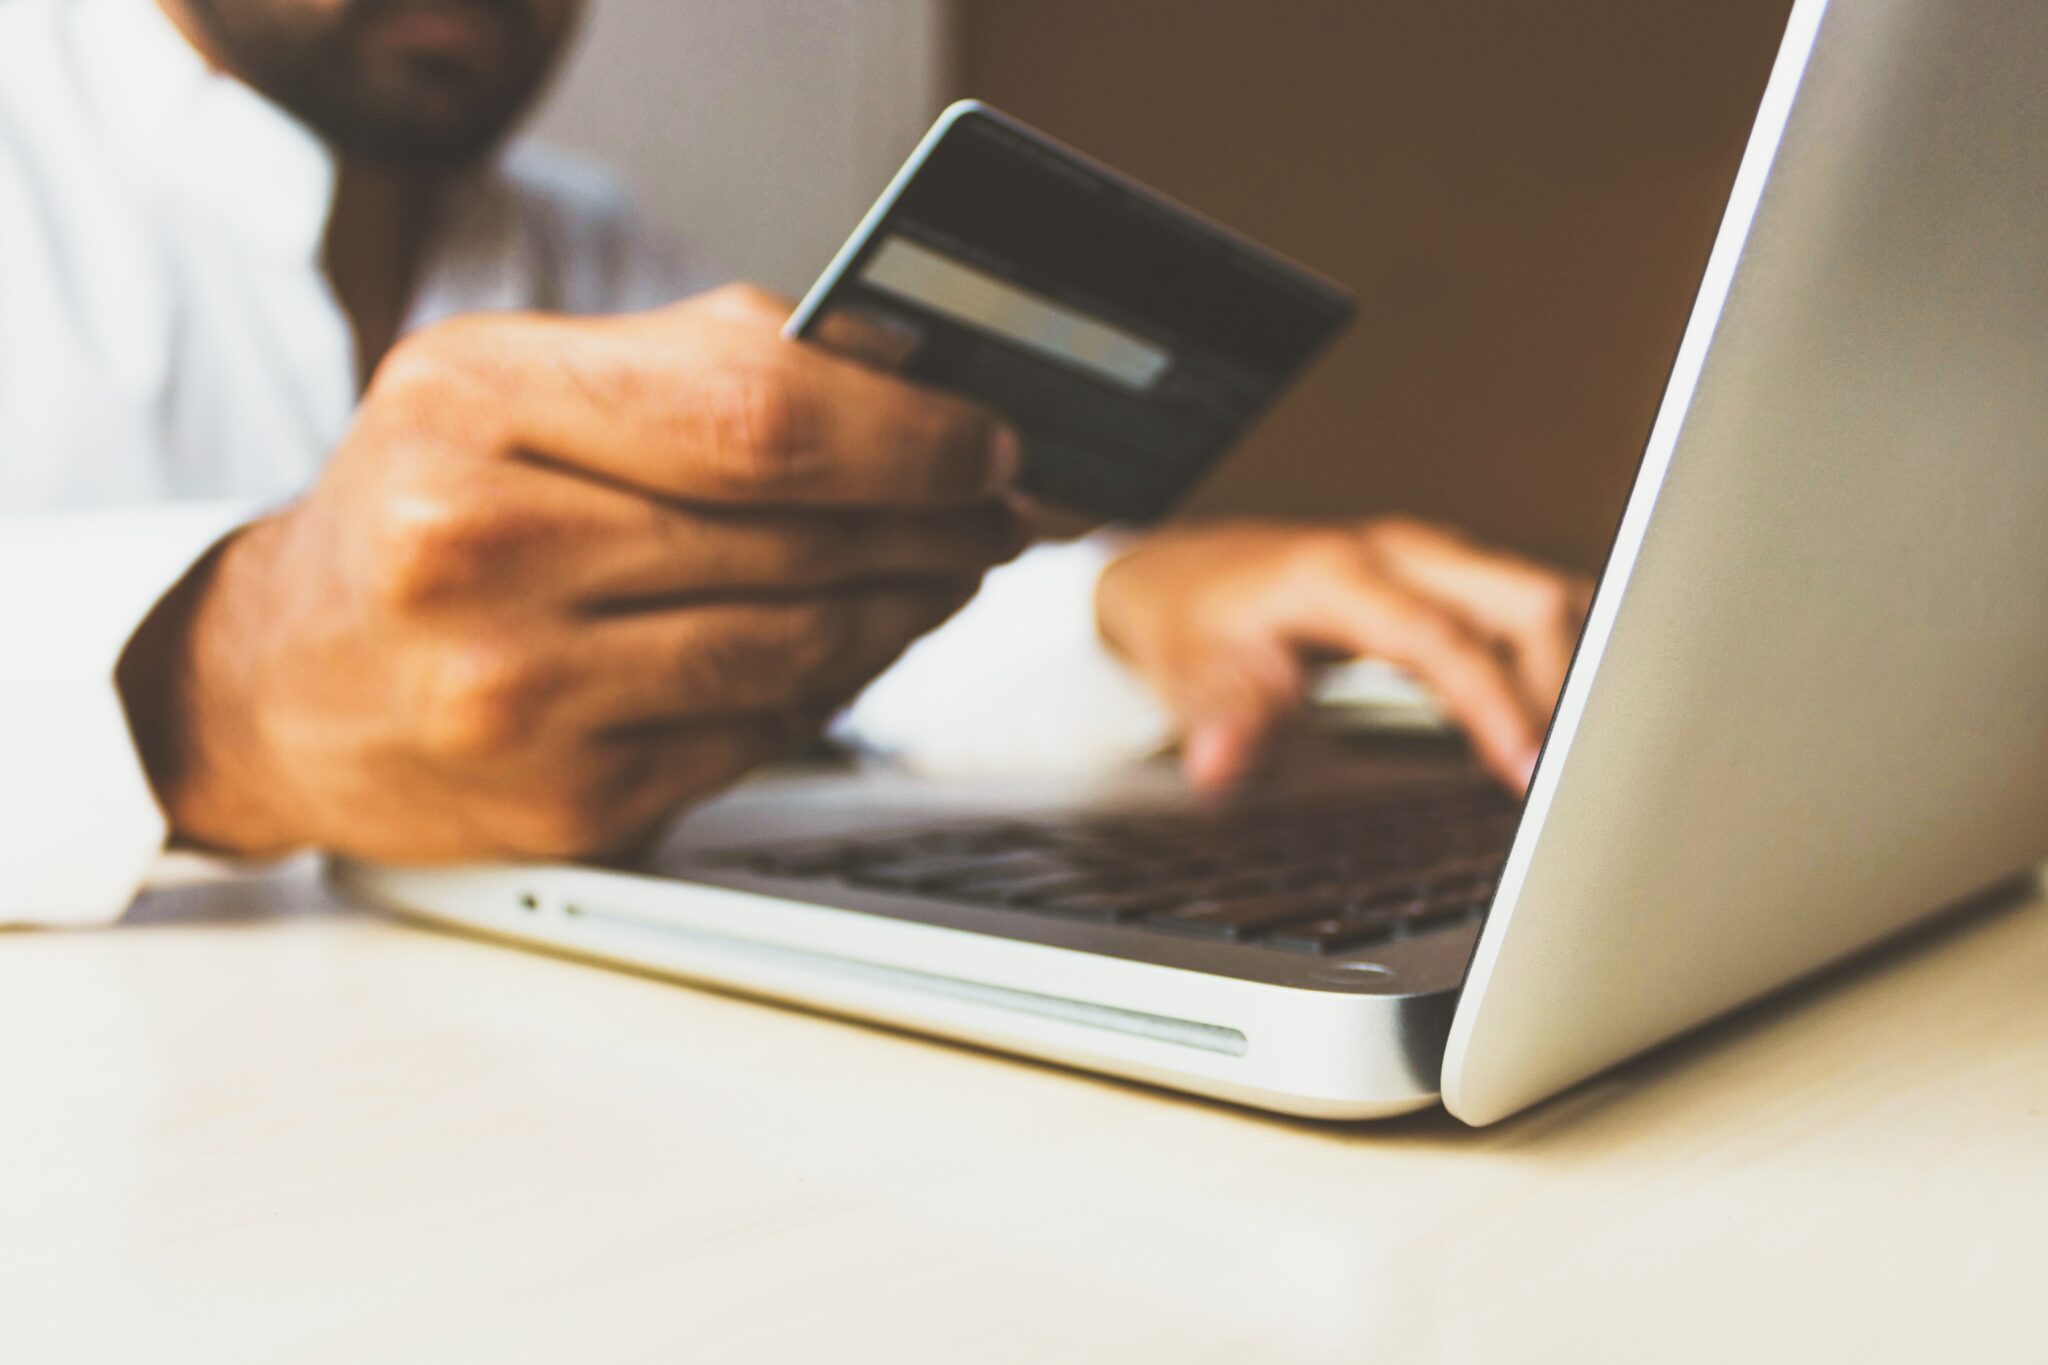 PCI DSS, otherwise known as the Payment Card Industry Data Security Standard, is a set of guidelines and requirements businesses must adhere to ensure credit card information remains secure online.